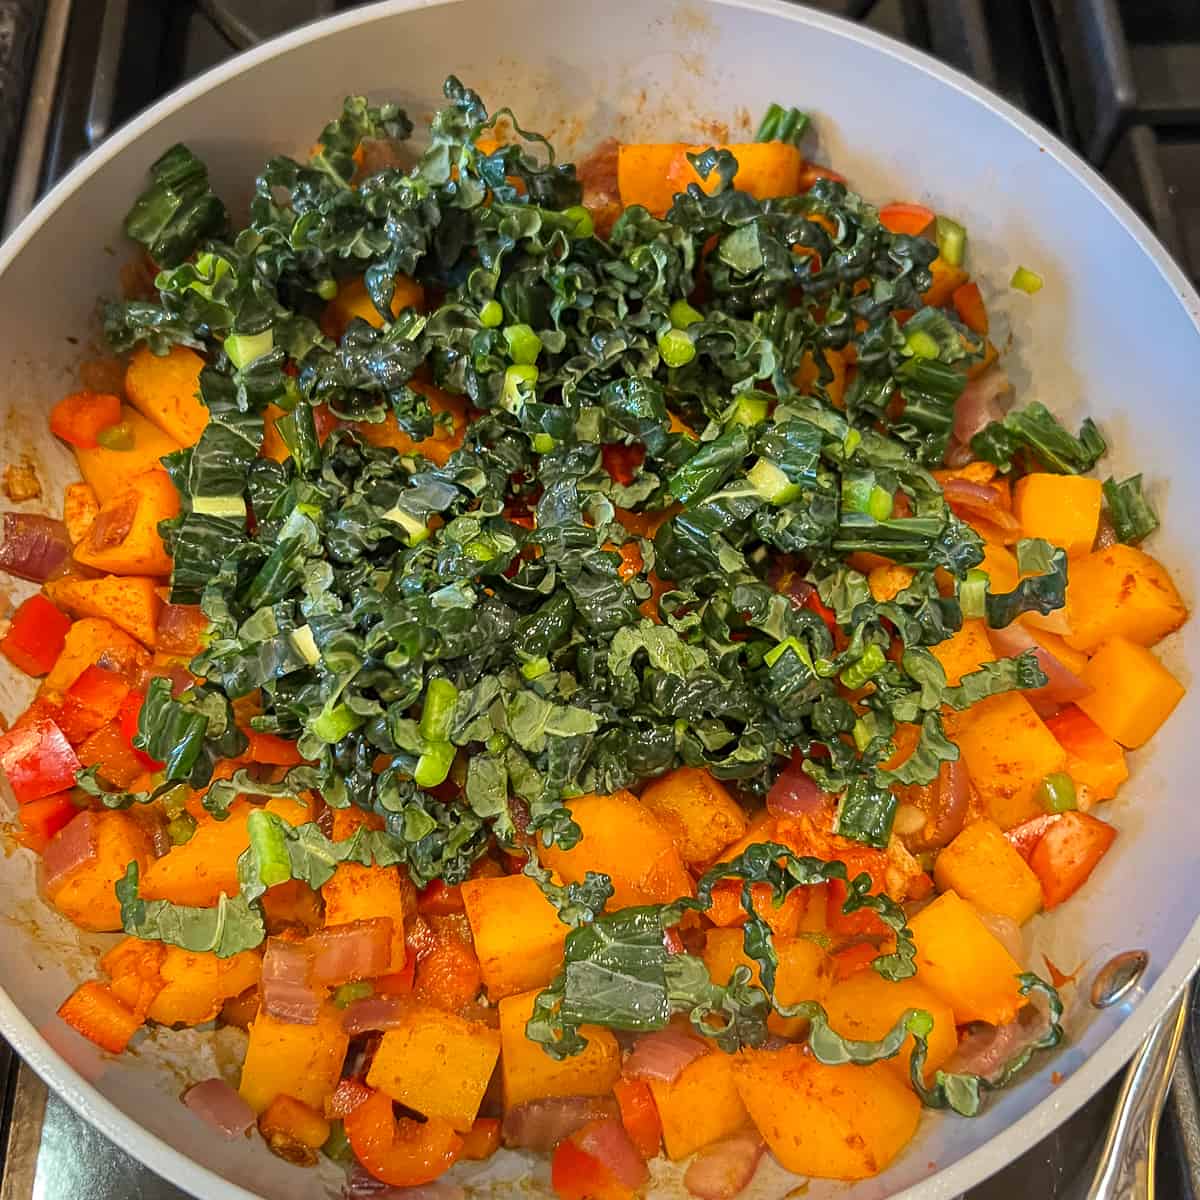 A pan with chopped kale, butternut squash cubes and other veggies. 